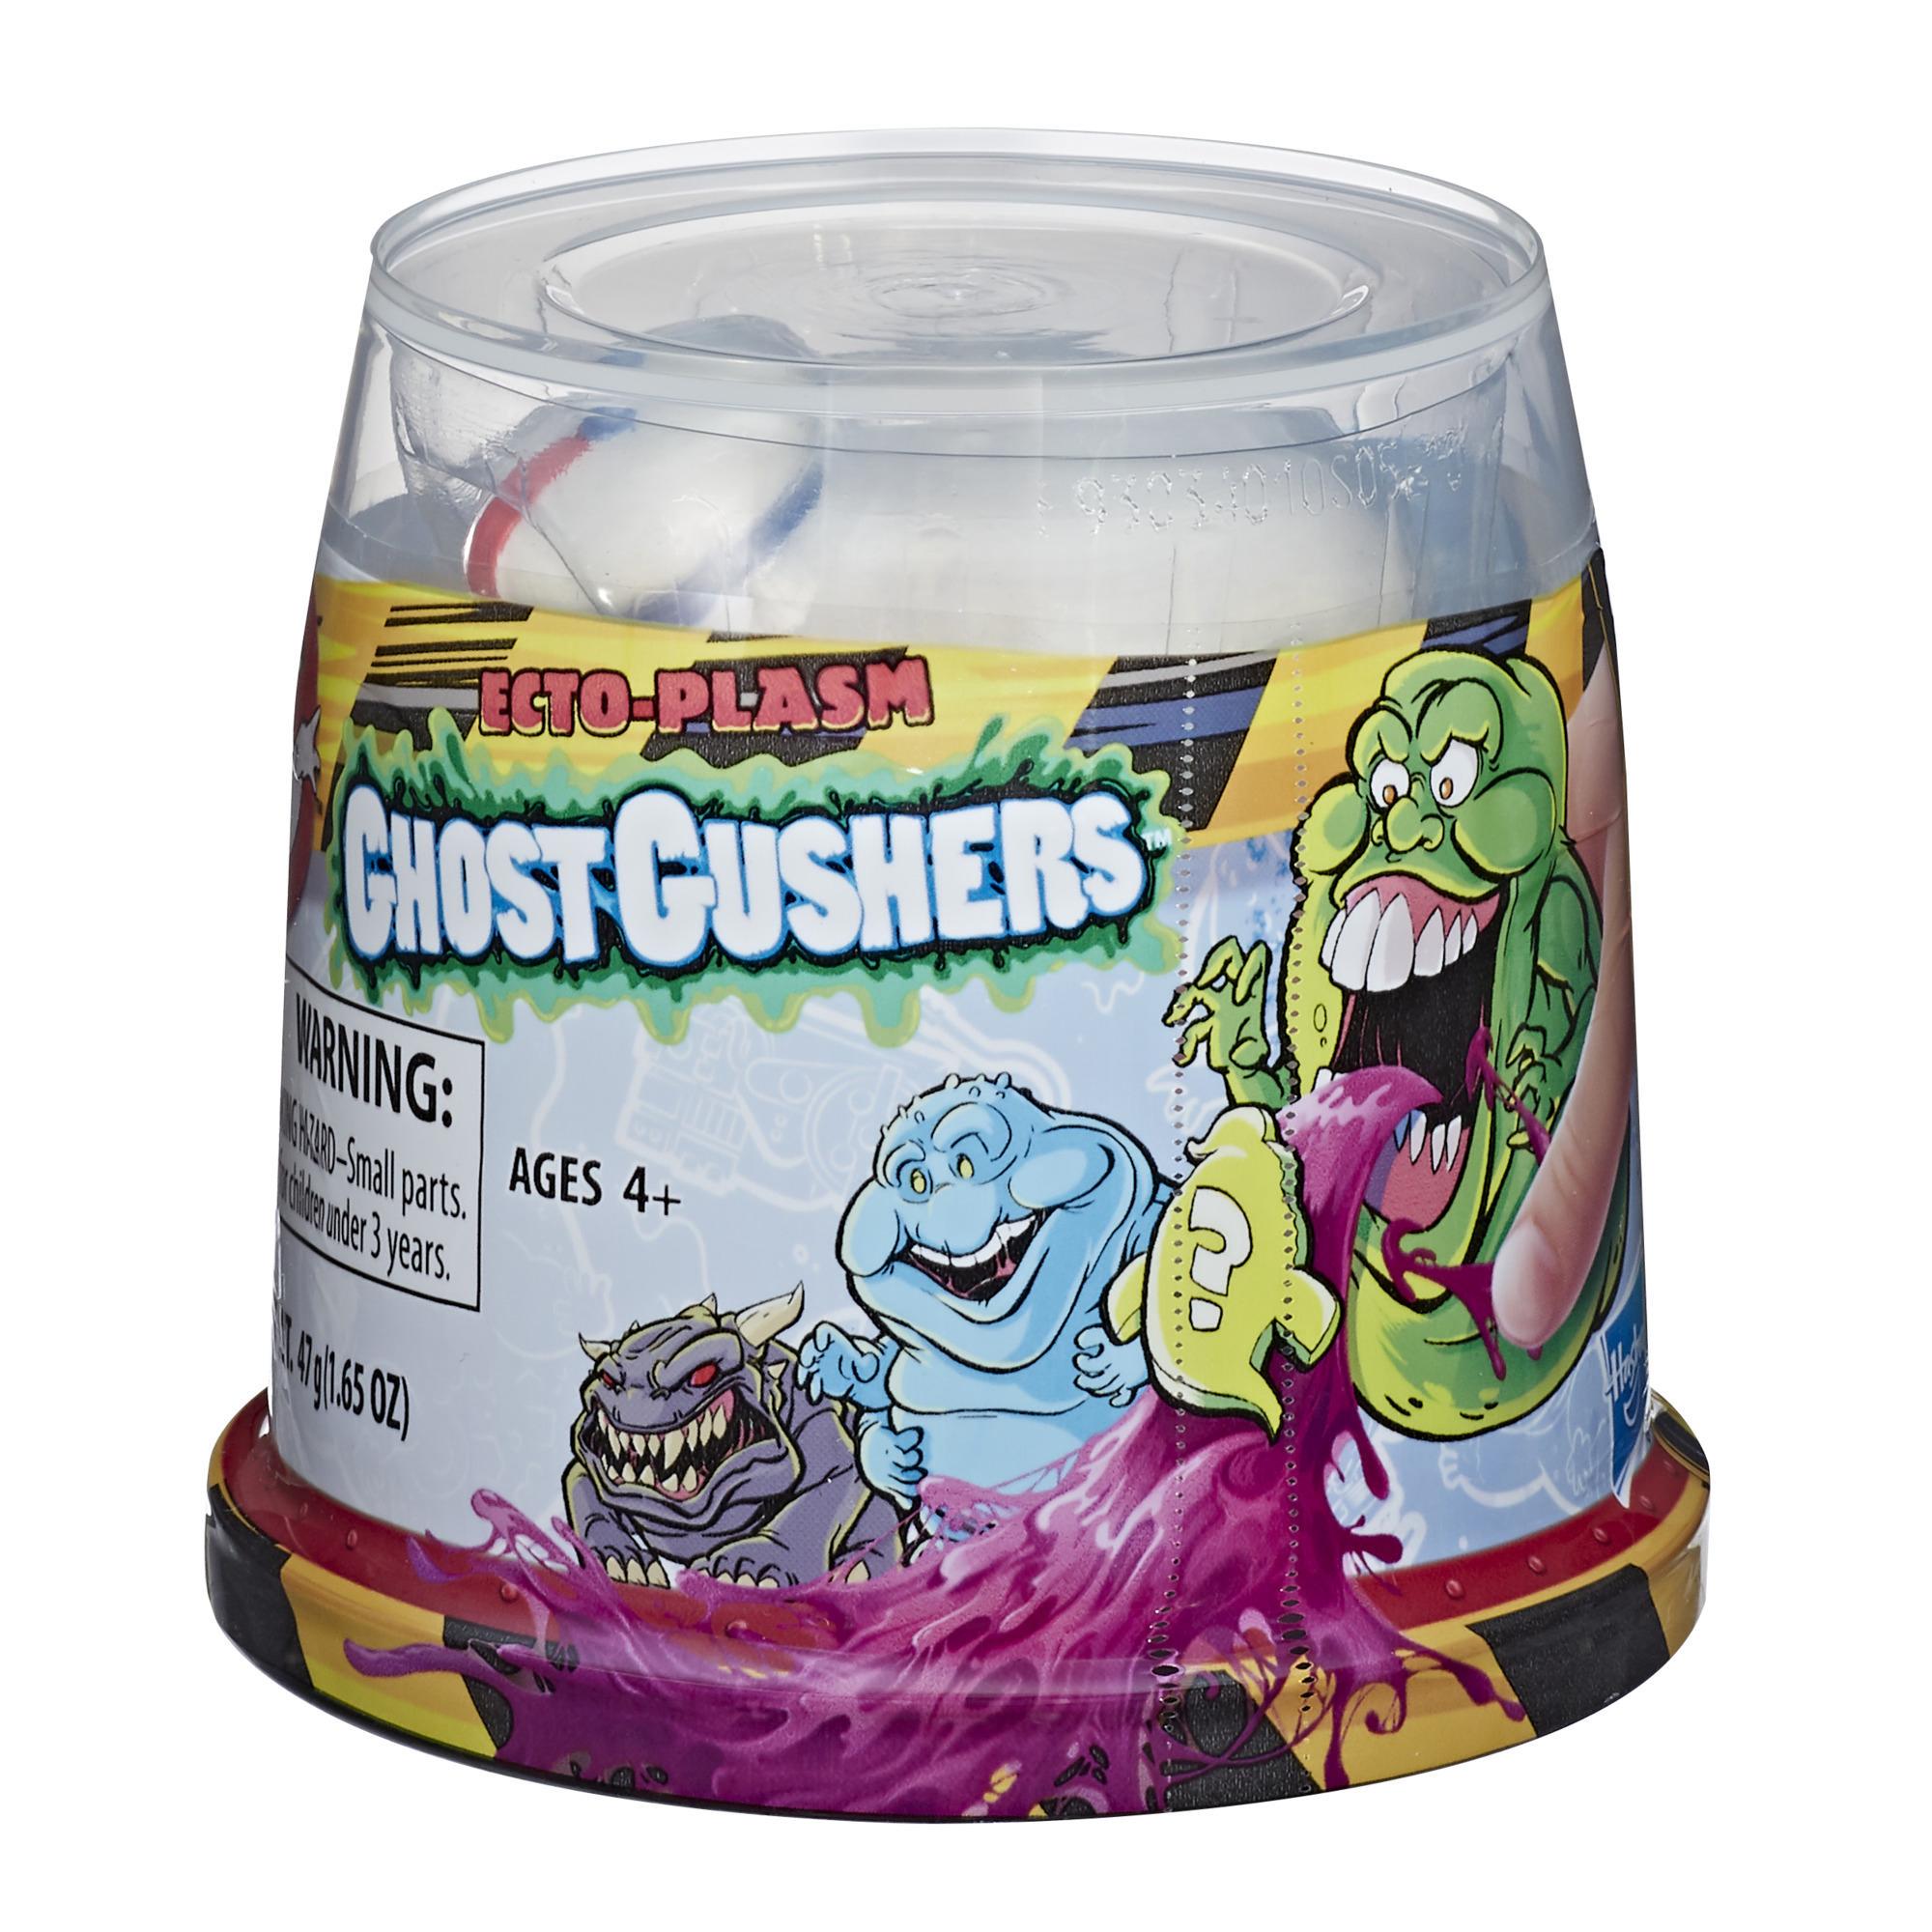 Ghostbusters Ecto-Plasm Ghost Gushers product thumbnail 1